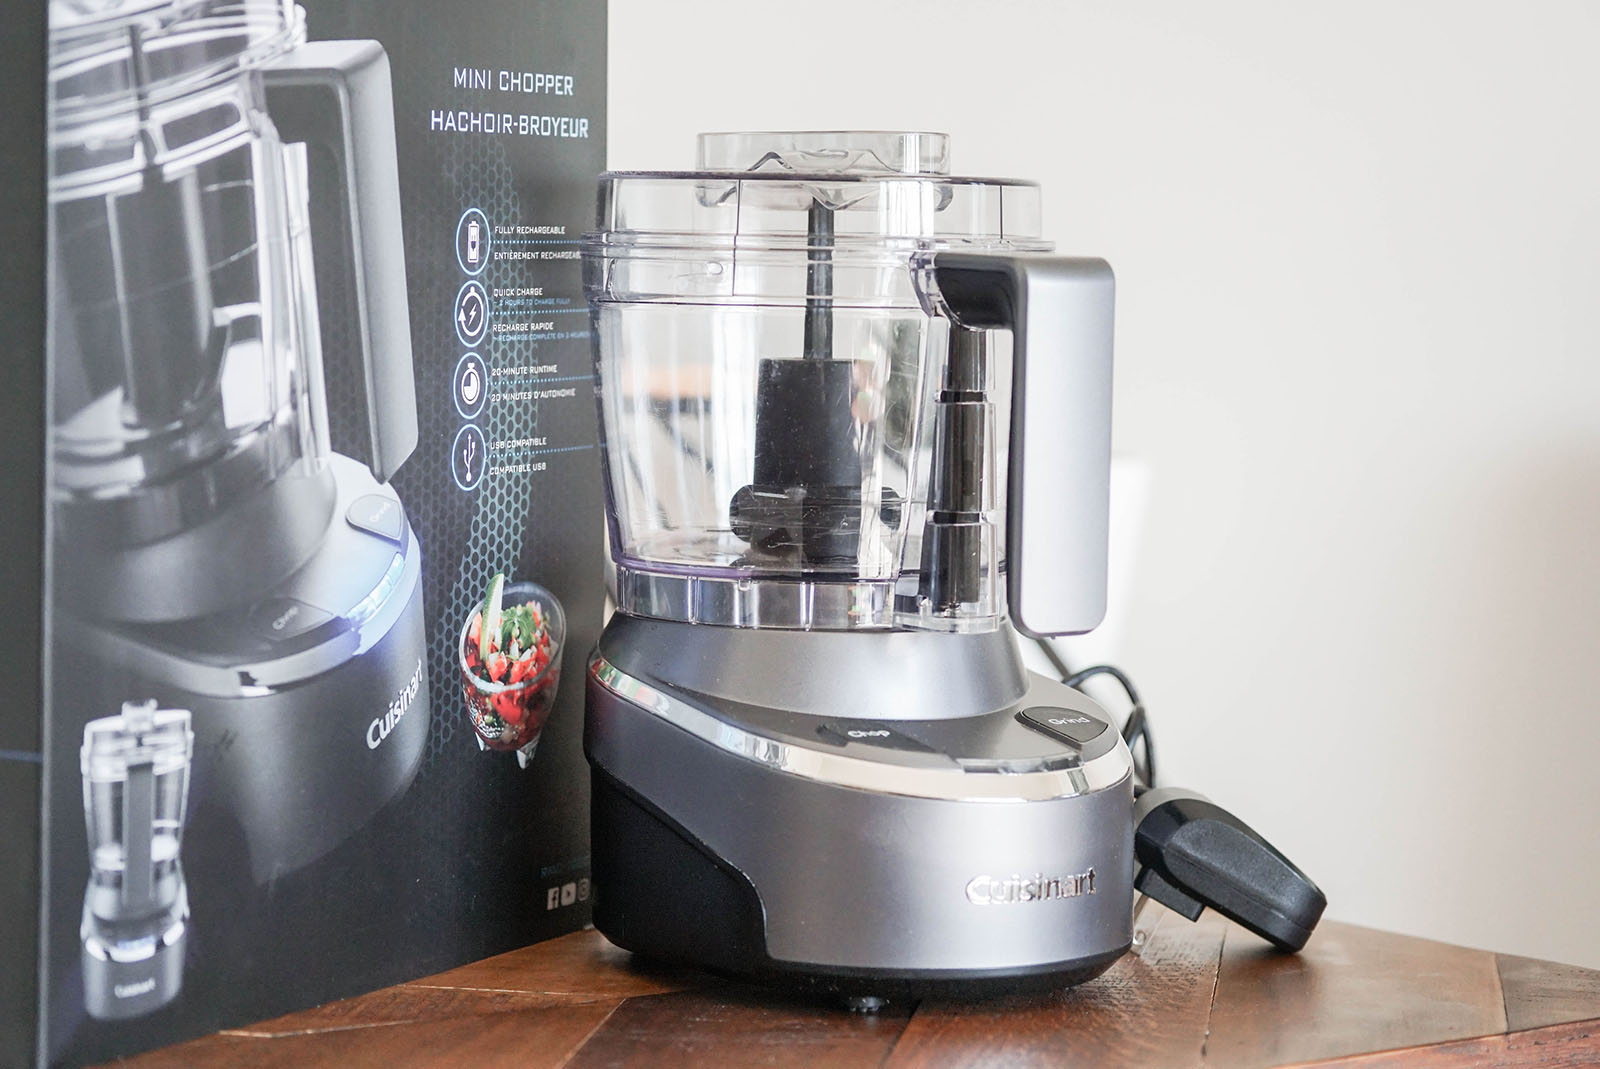 What's in the box of the Cuisinart Cordless Food Chopper